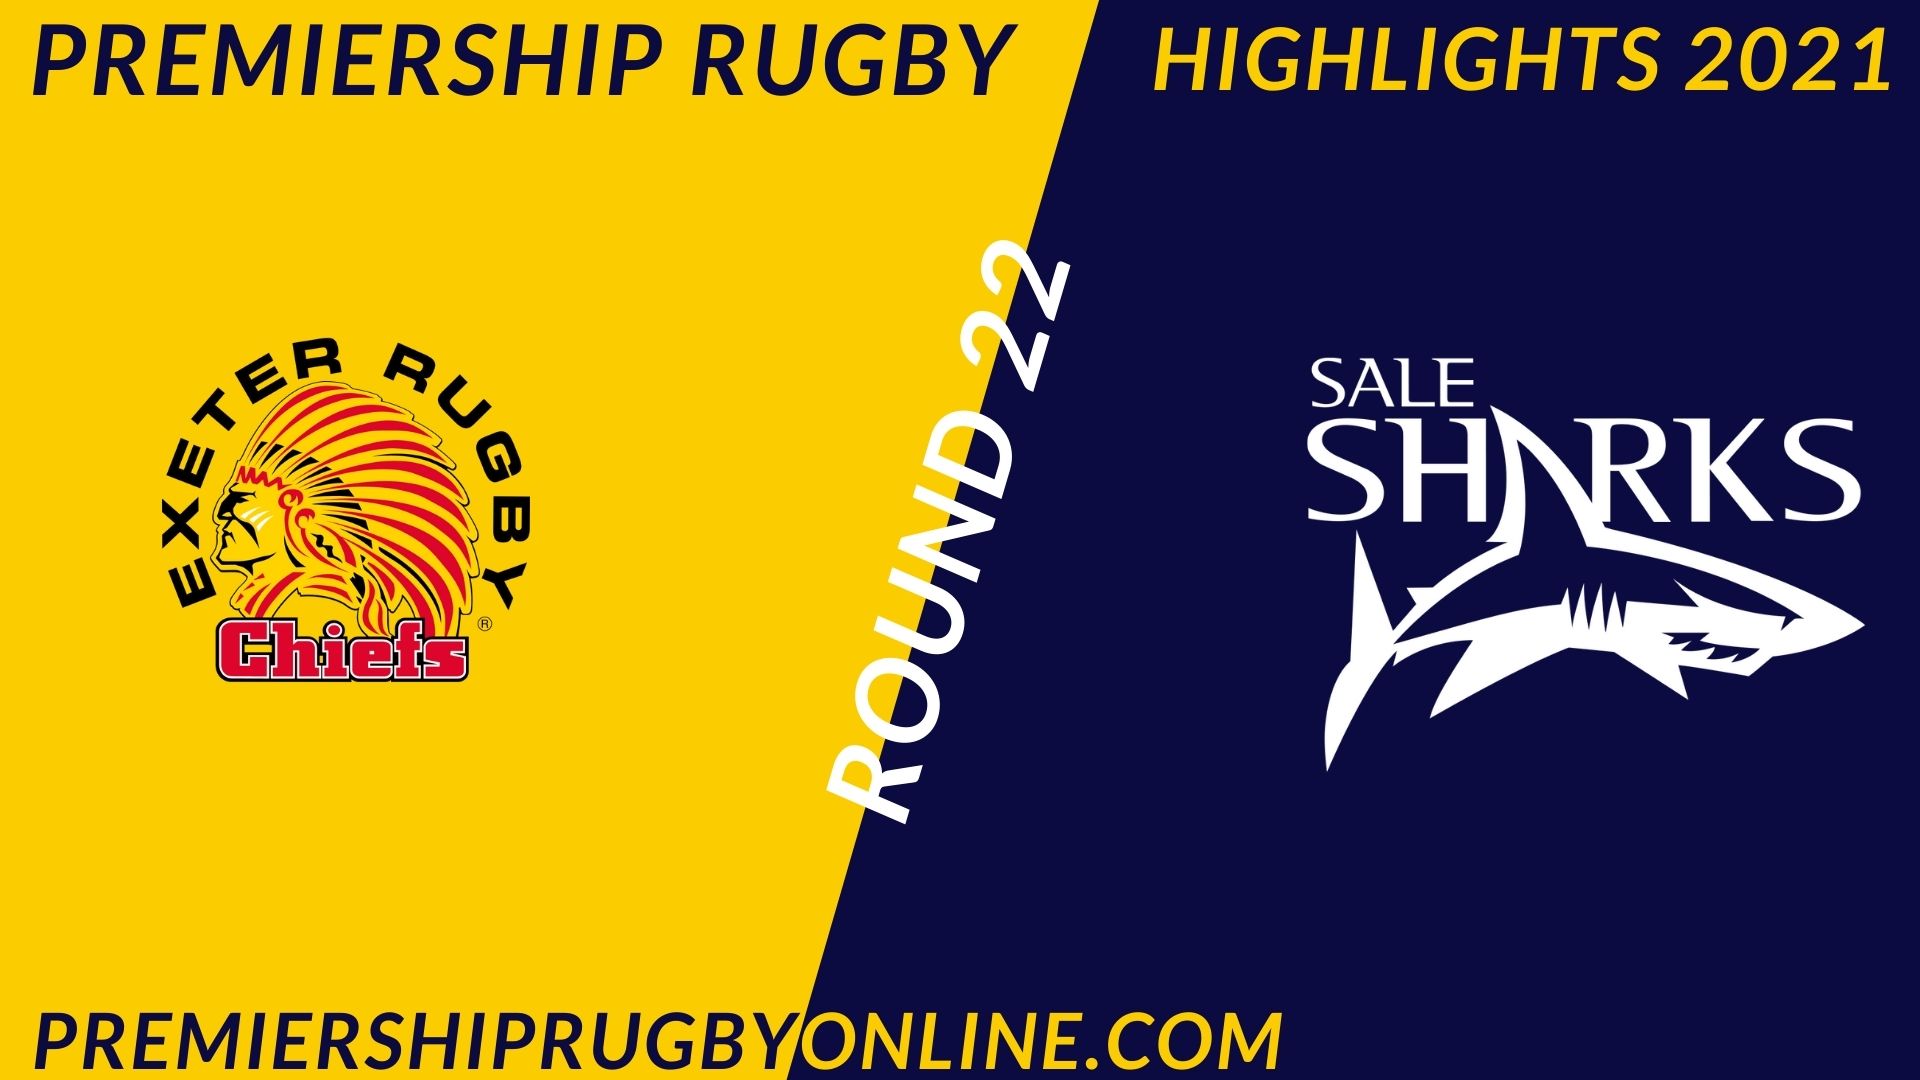 Exeter Chiefs Vs Sale Sharks Highlights 2021 RD 22